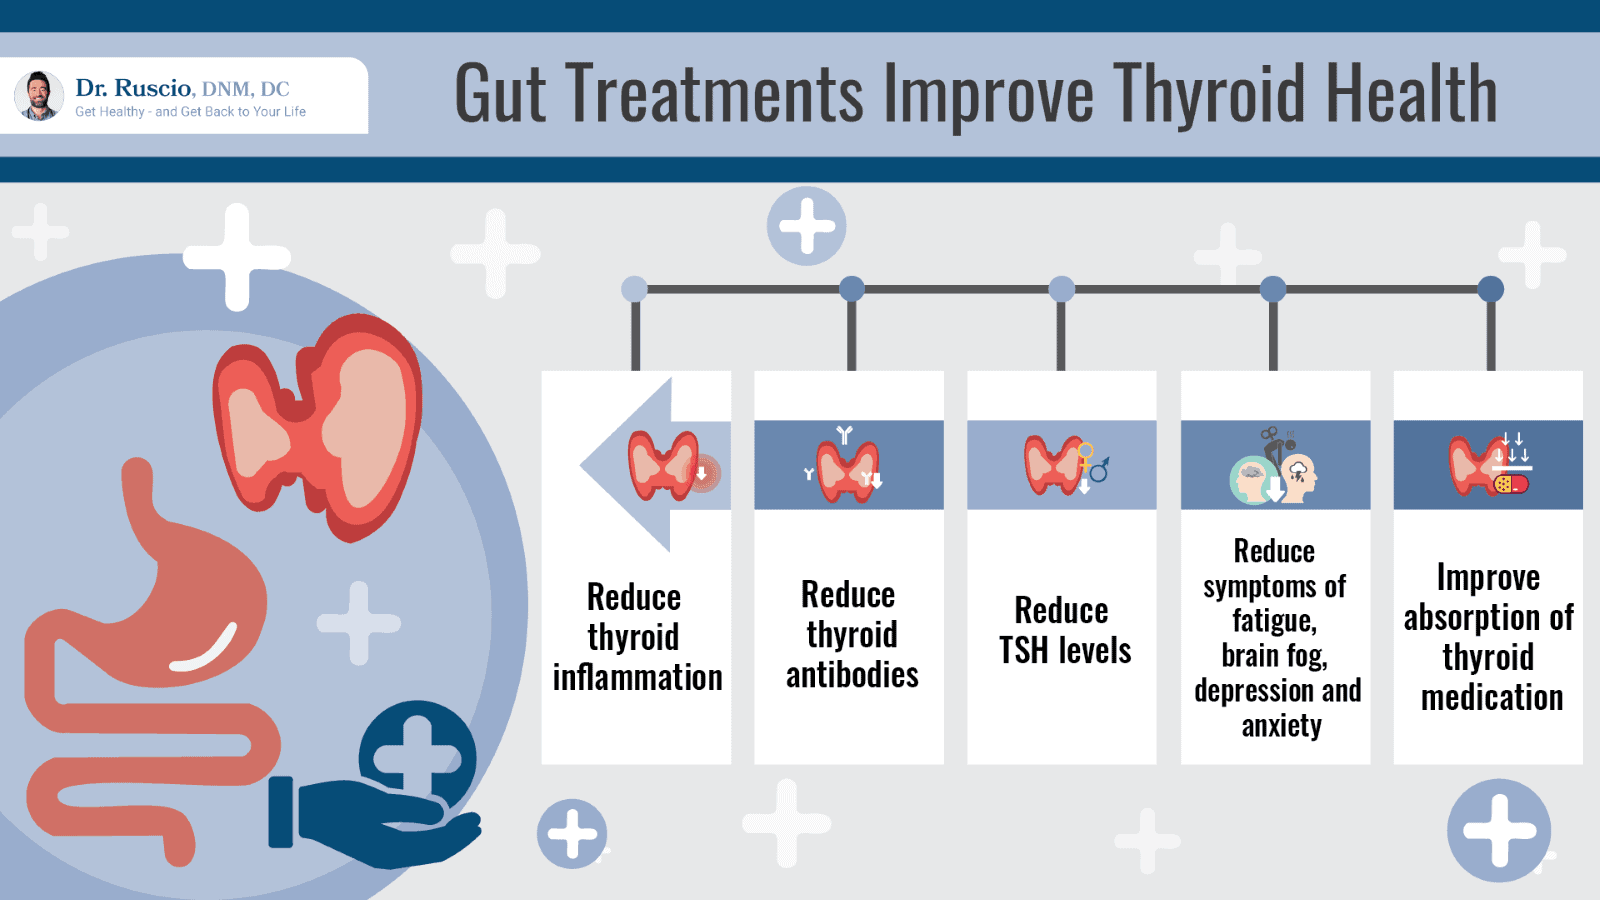 Gut treatments that improve thyroid health infographic by Dr. Ruscio